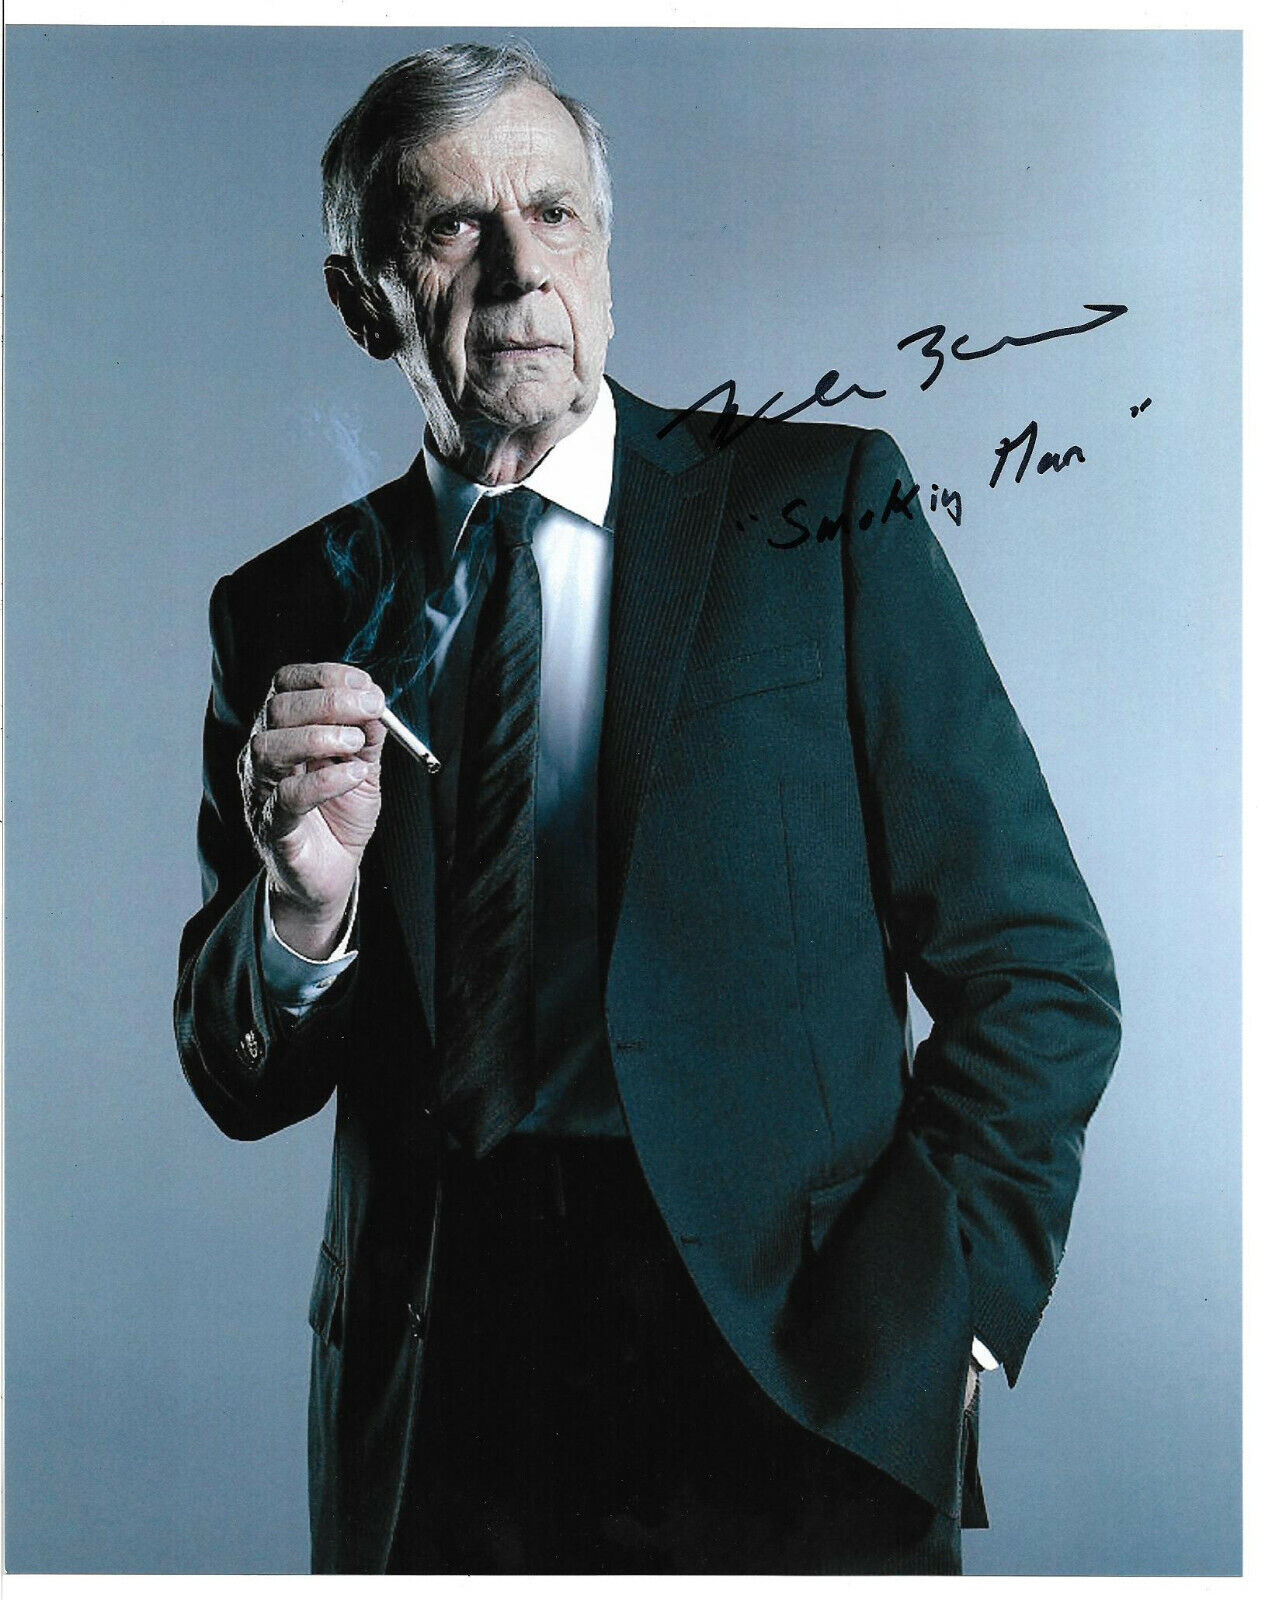 William B. Davis Authentic Signed 8x10 Photo Poster painting Autographed, X-Files, Smoking Man